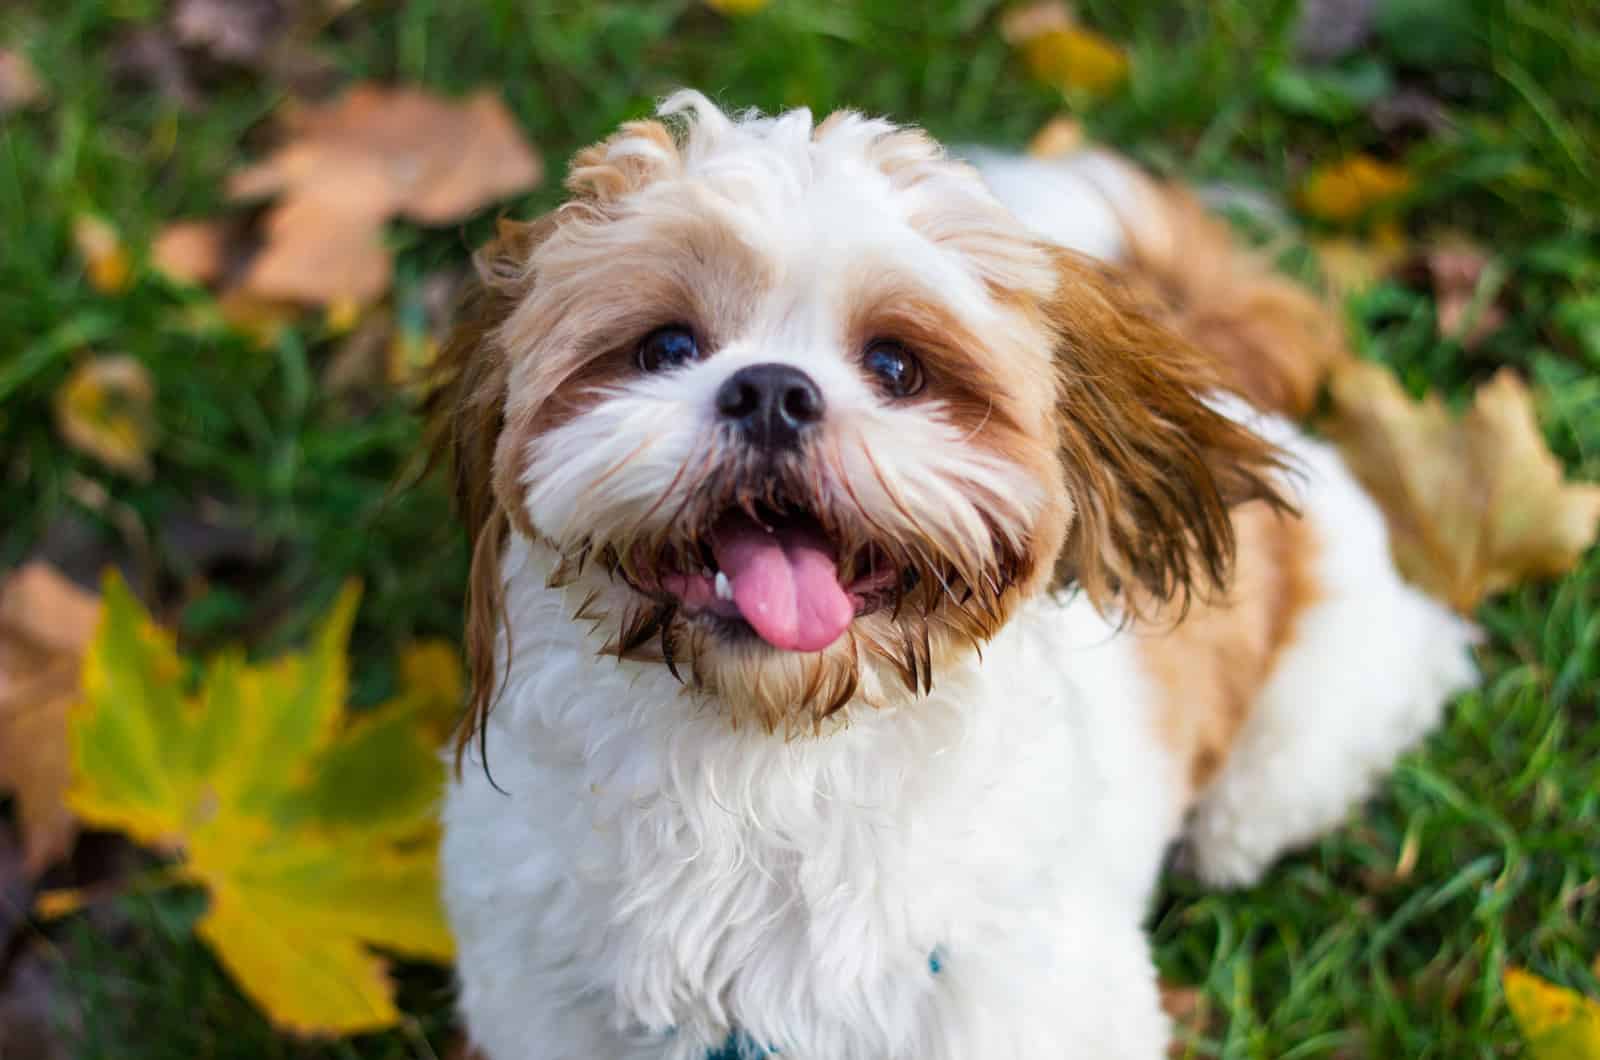 Shih Tzu sits and laughs as he looks at the camera